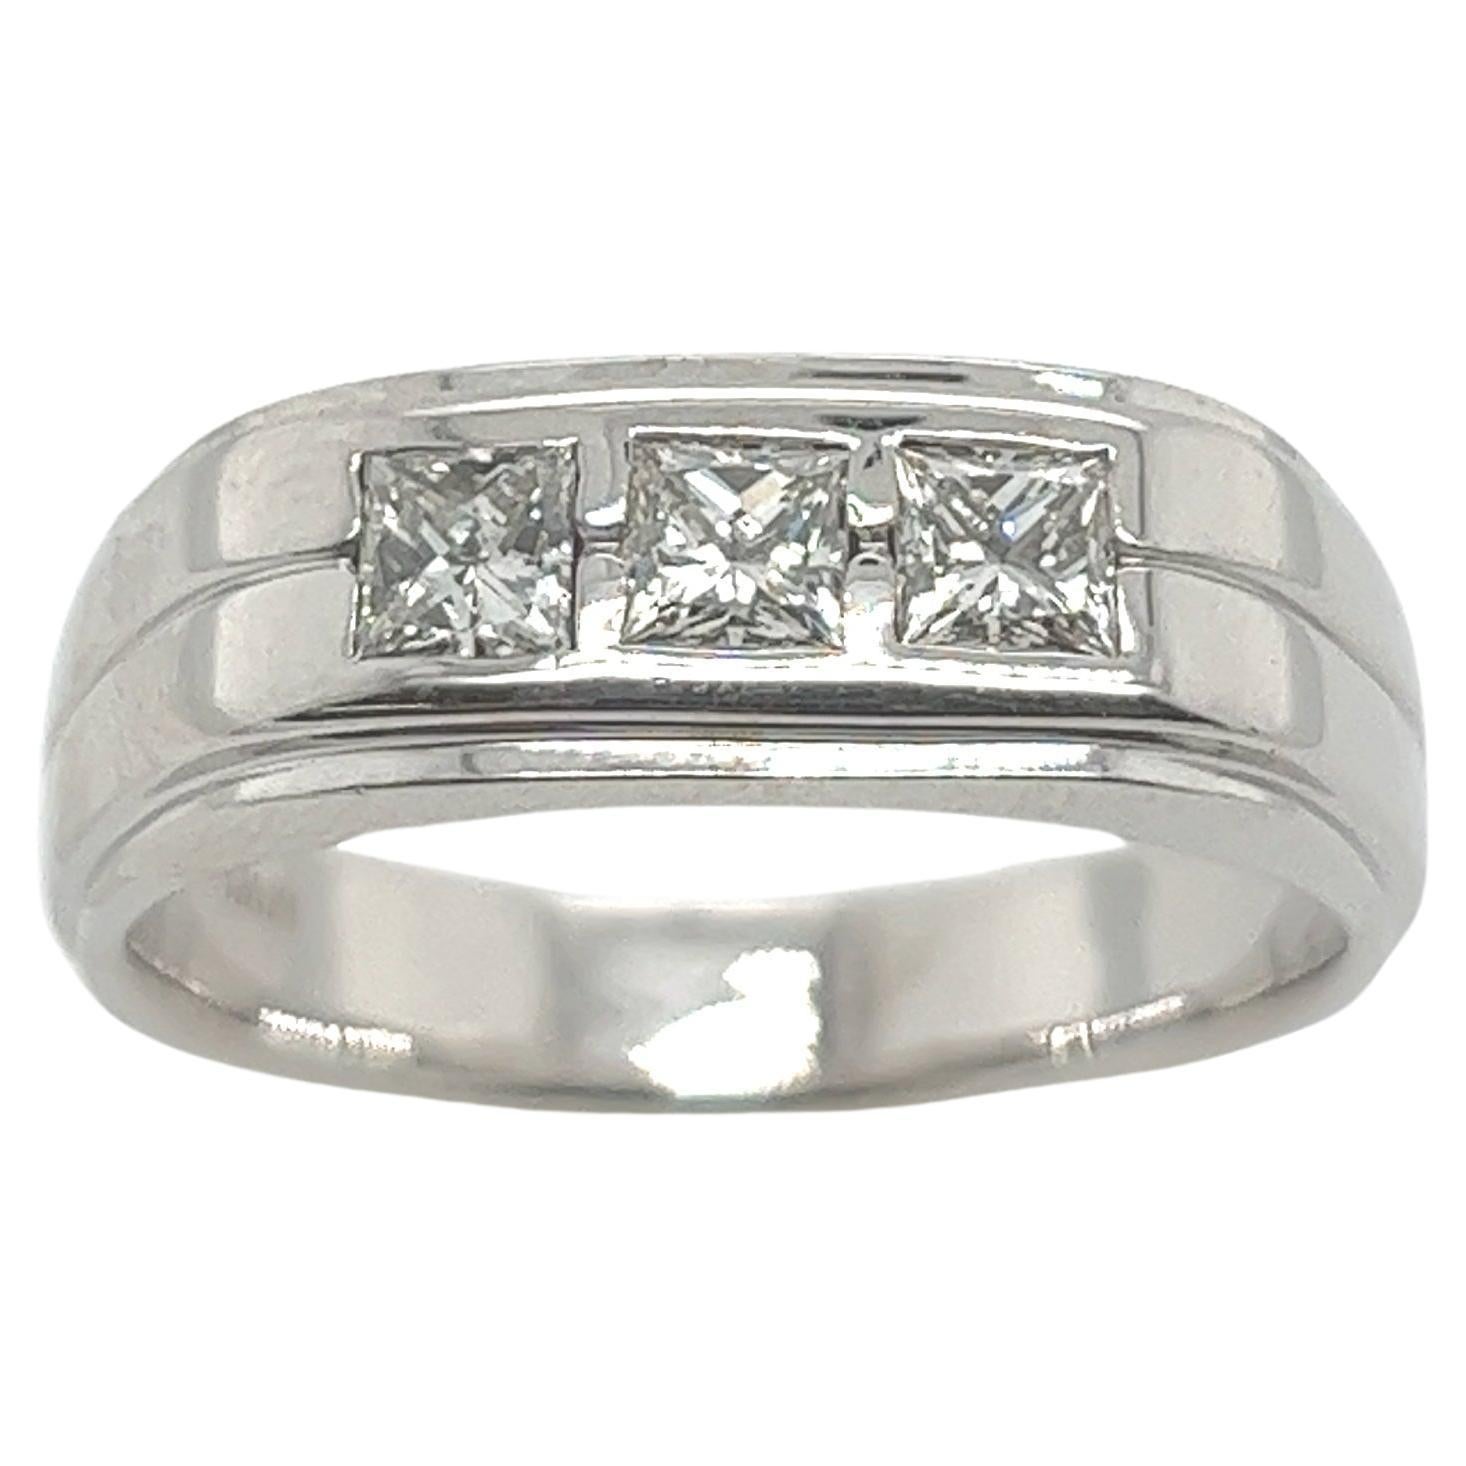 14ct White Gold 3-Sone Diamond Gents Ring, Set with 0.90ct of Square Diamonds